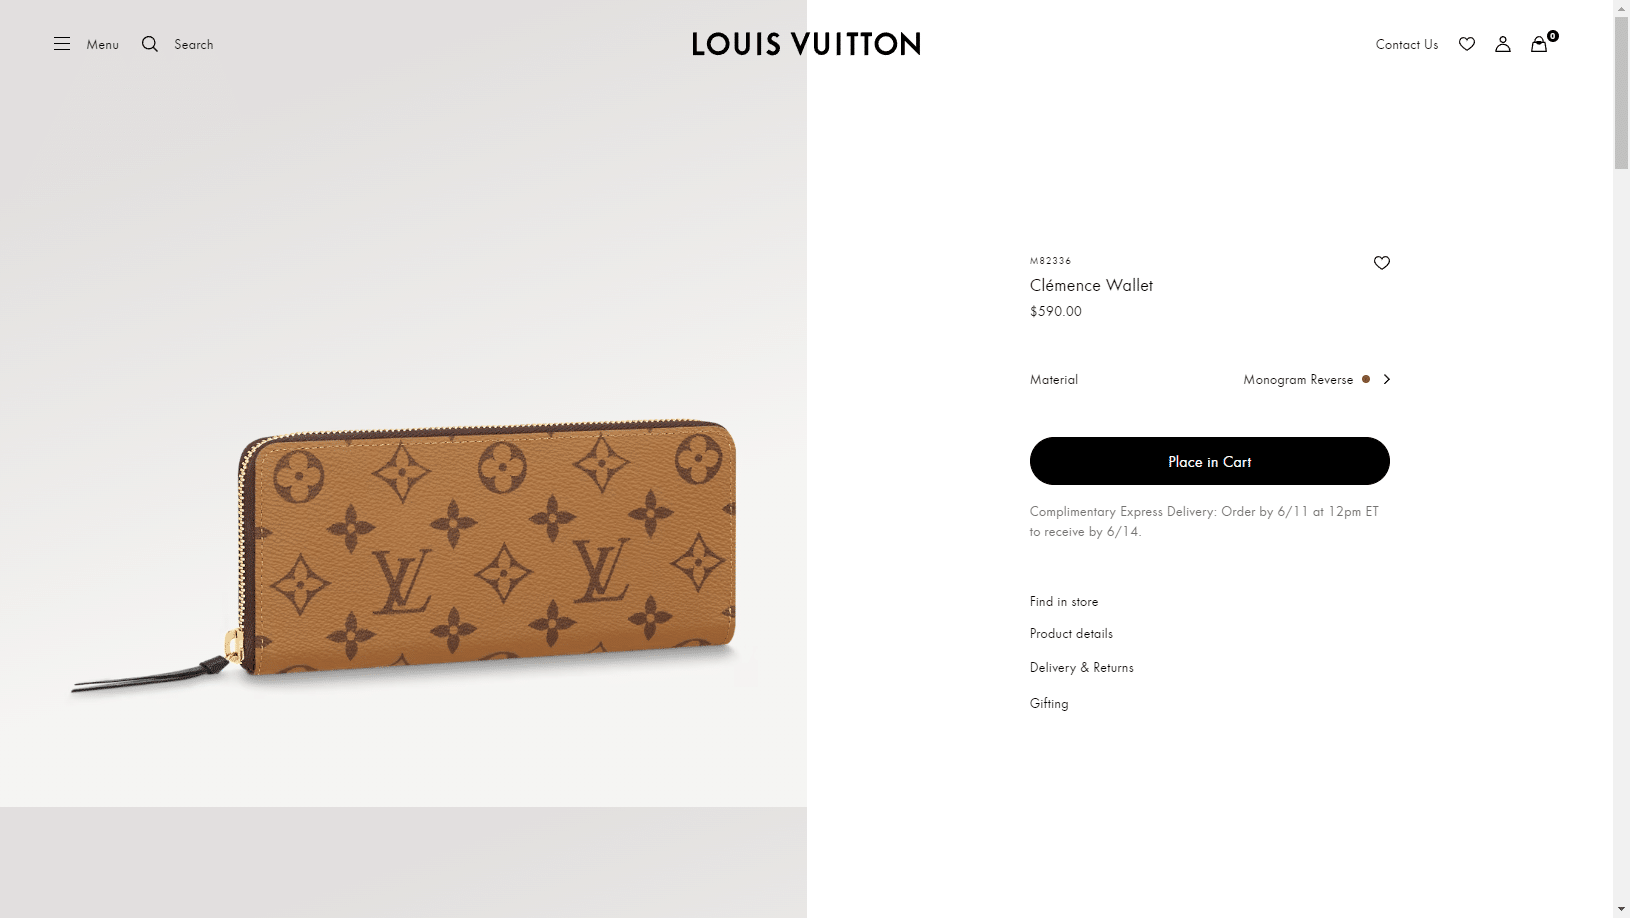 Clemence-Wallet-Monogram-Reverse-Women-Small-Leather-Goods-LOUIS-VUITTON-.png